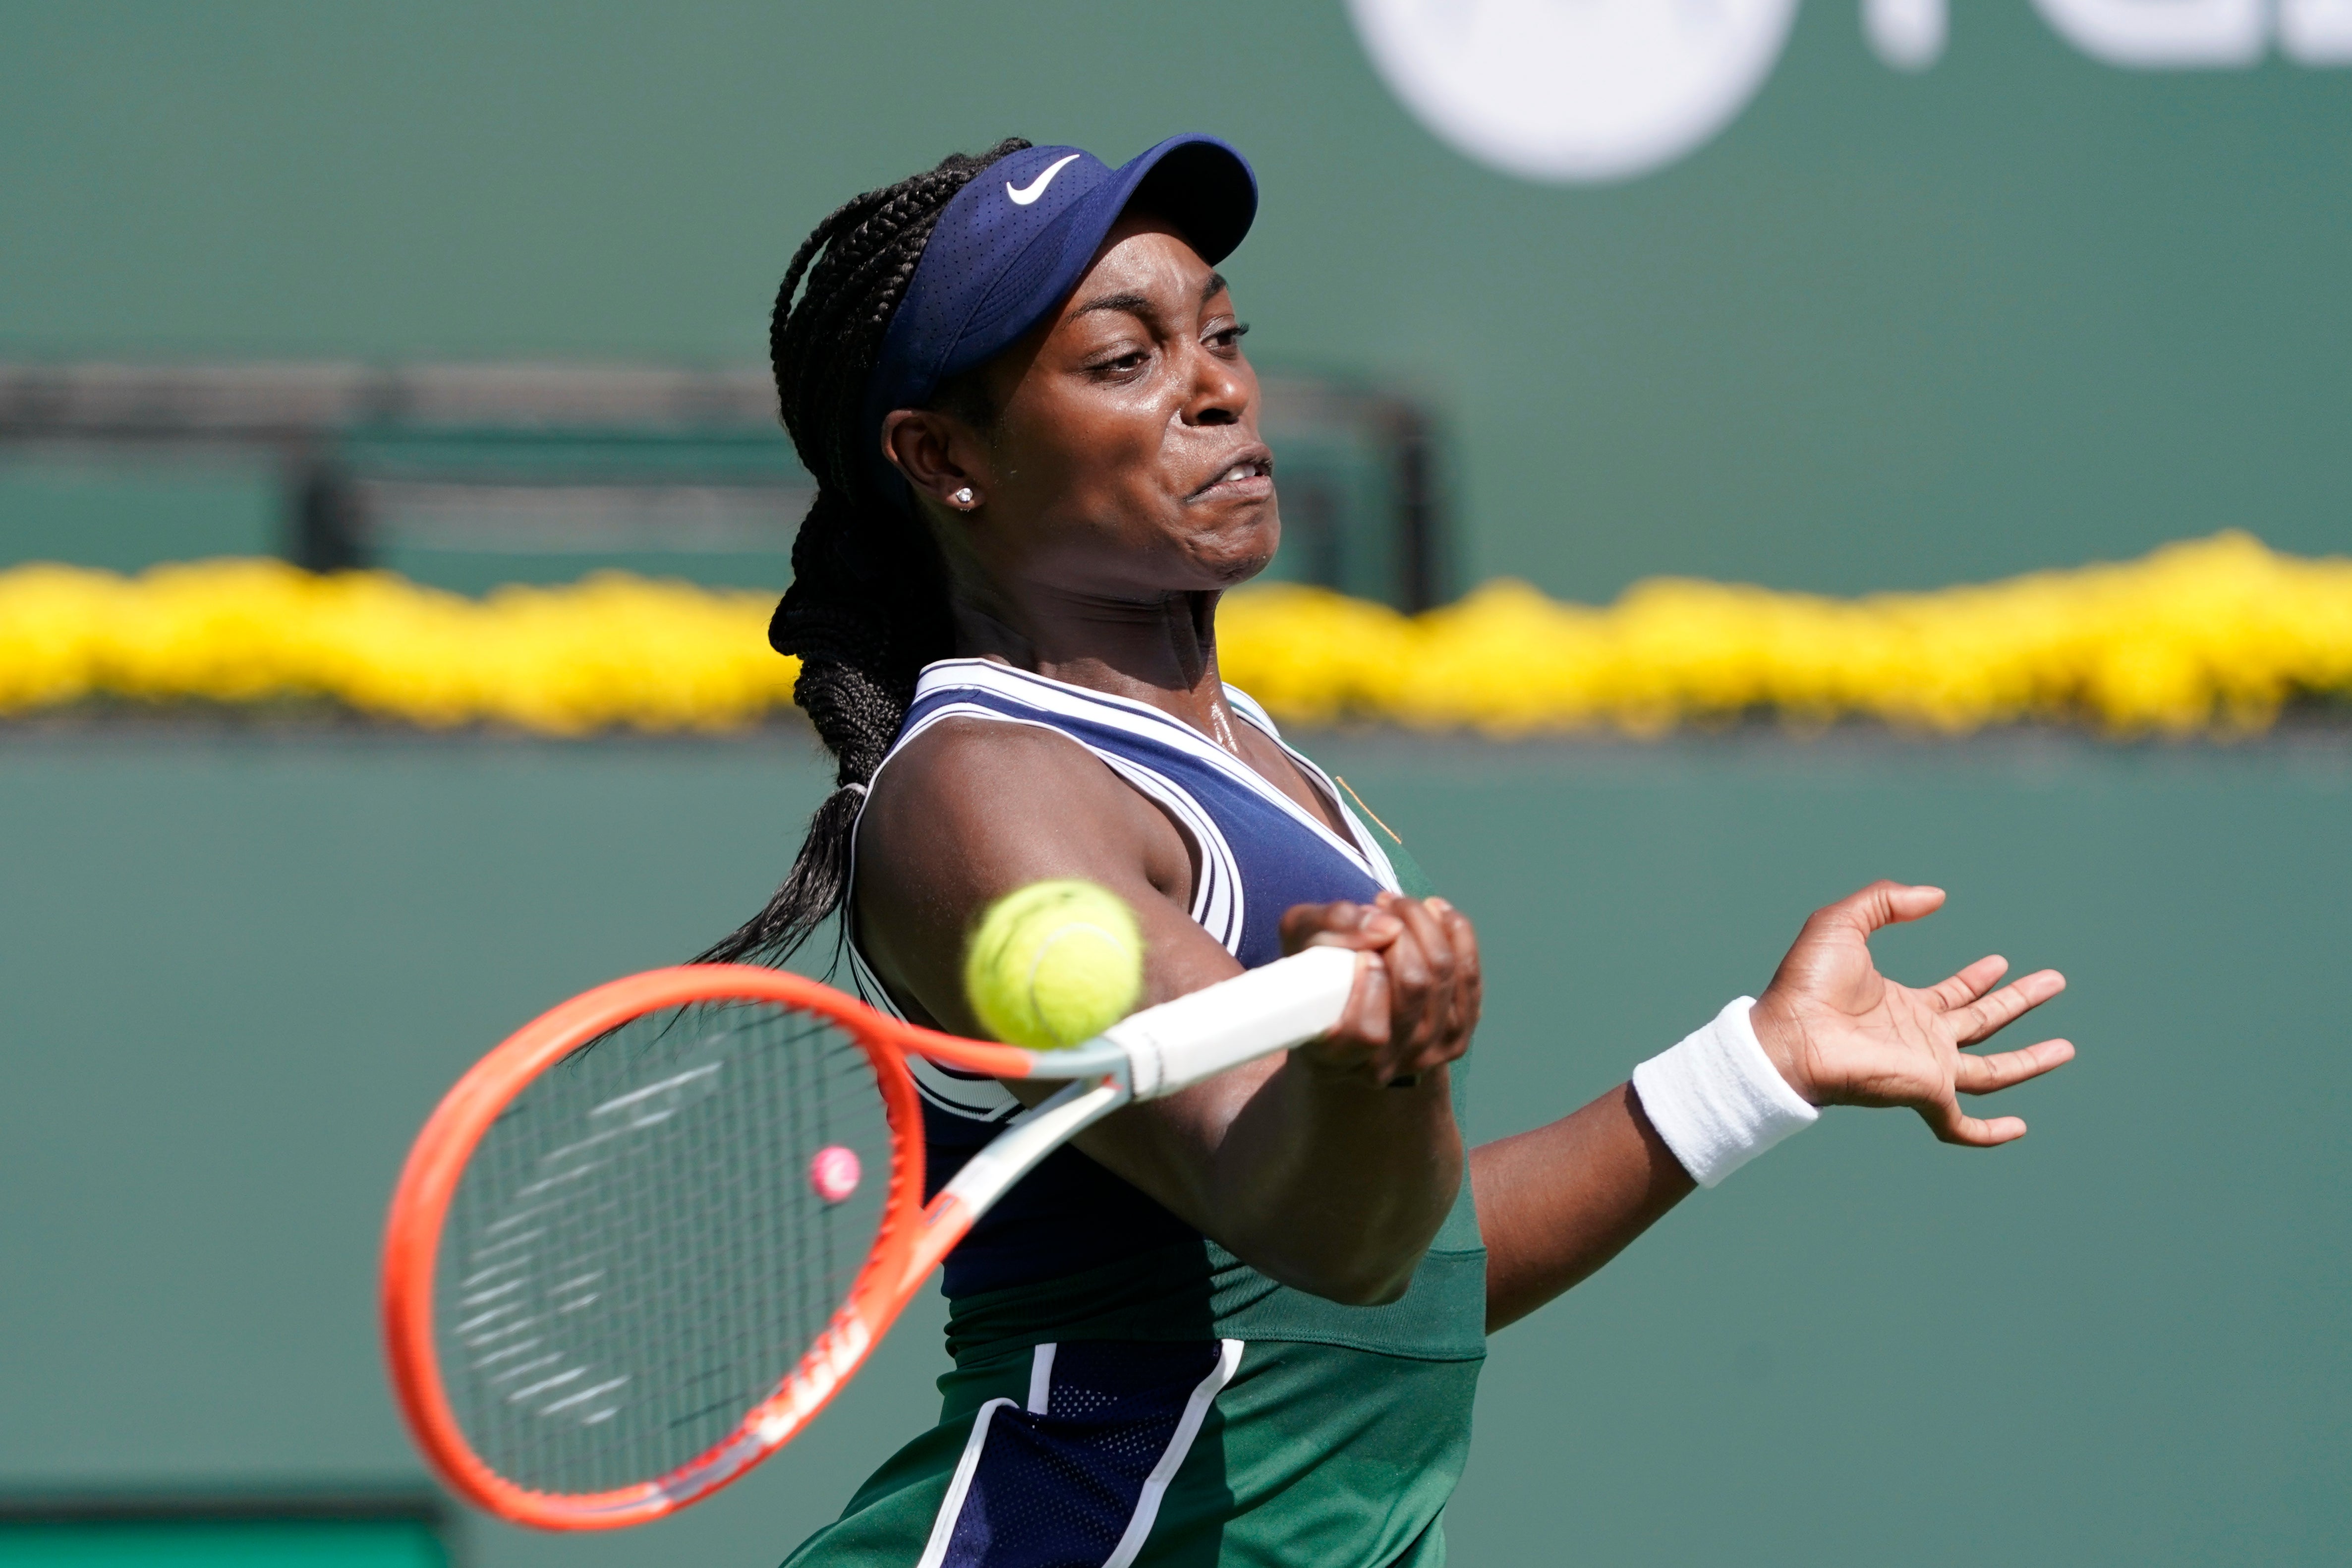 American Sloane Stephens will play compatriot Jessica Pegula in the next round (AP Photo/Mark J. Terrill)